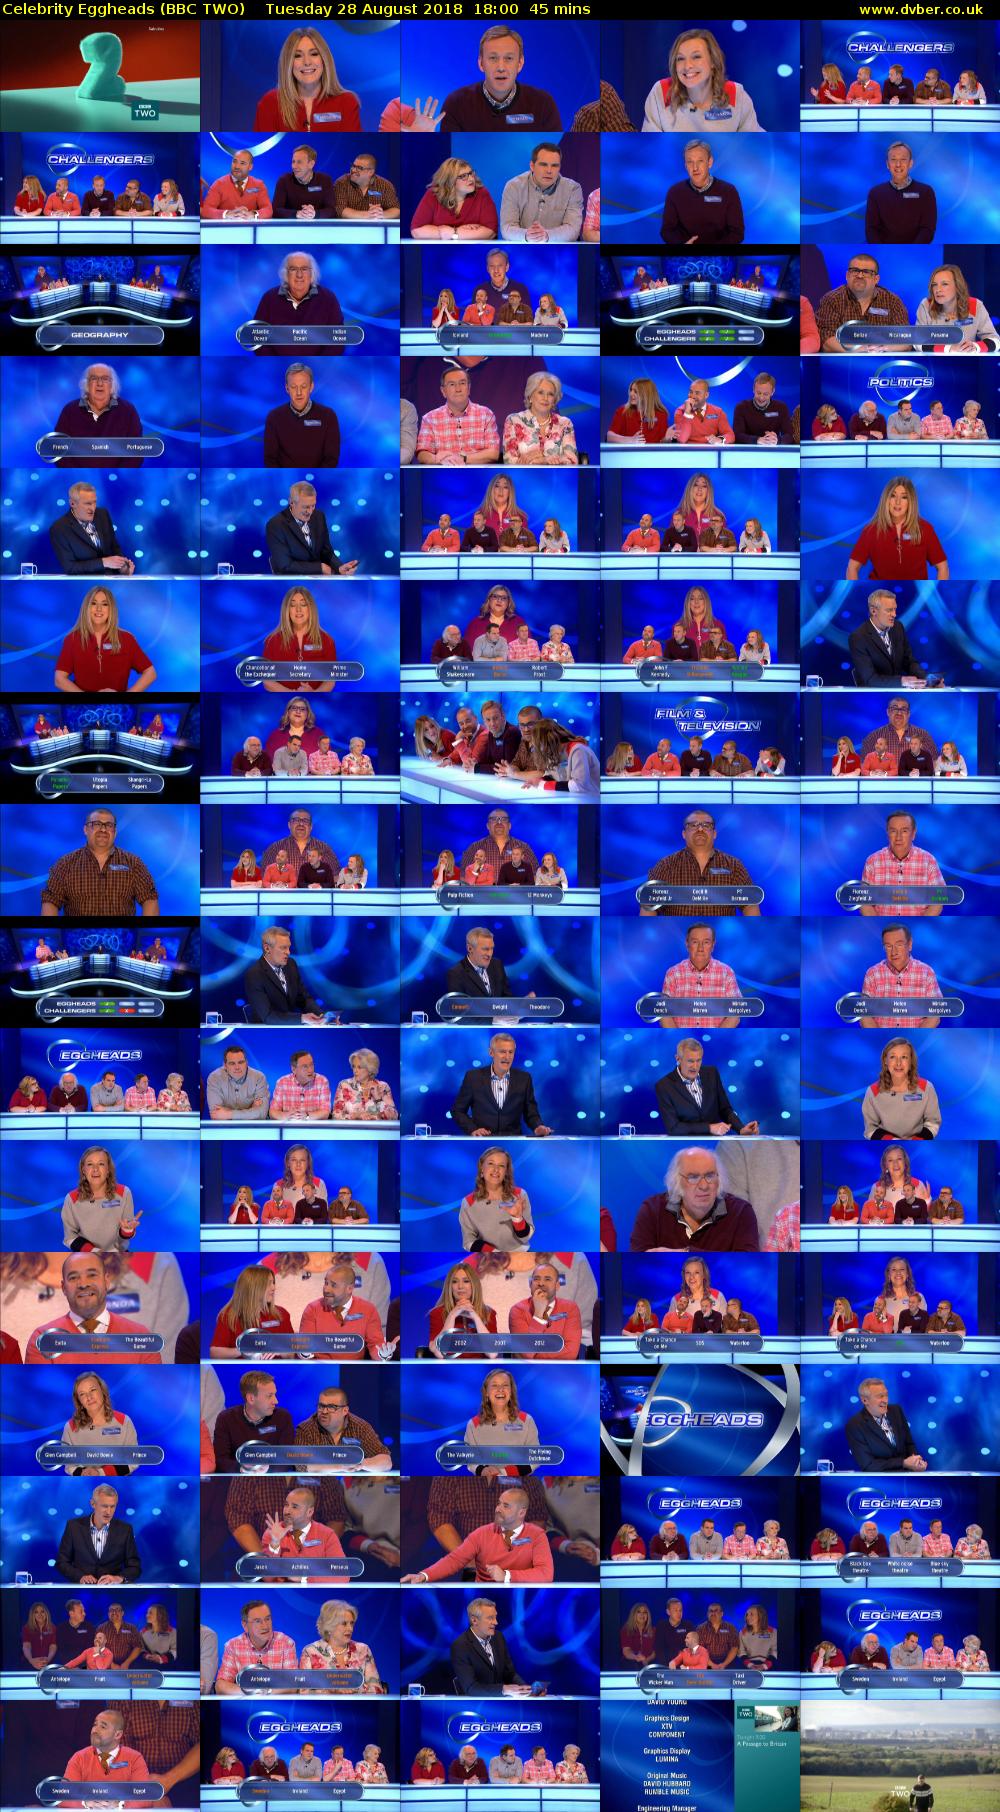 Celebrity Eggheads (BBC TWO) Tuesday 28 August 2018 18:00 - 18:45